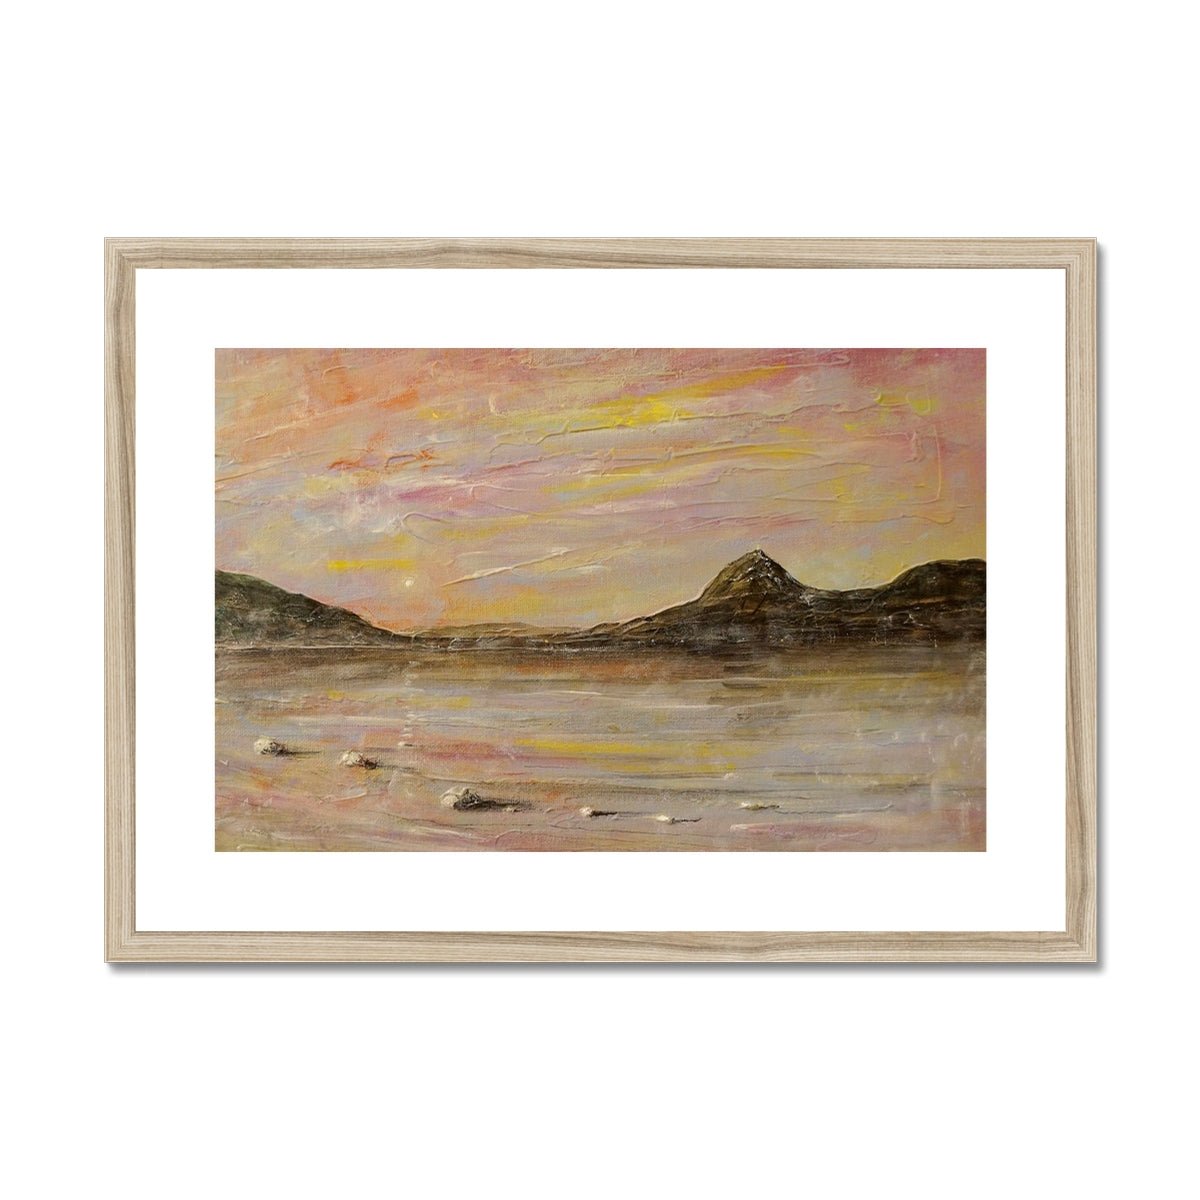 Loch Rannoch Dawn Painting | Framed & Mounted Prints From Scotland-Framed & Mounted Prints-Scottish Lochs & Mountains Art Gallery-A2 Landscape-Natural Frame-Paintings, Prints, Homeware, Art Gifts From Scotland By Scottish Artist Kevin Hunter